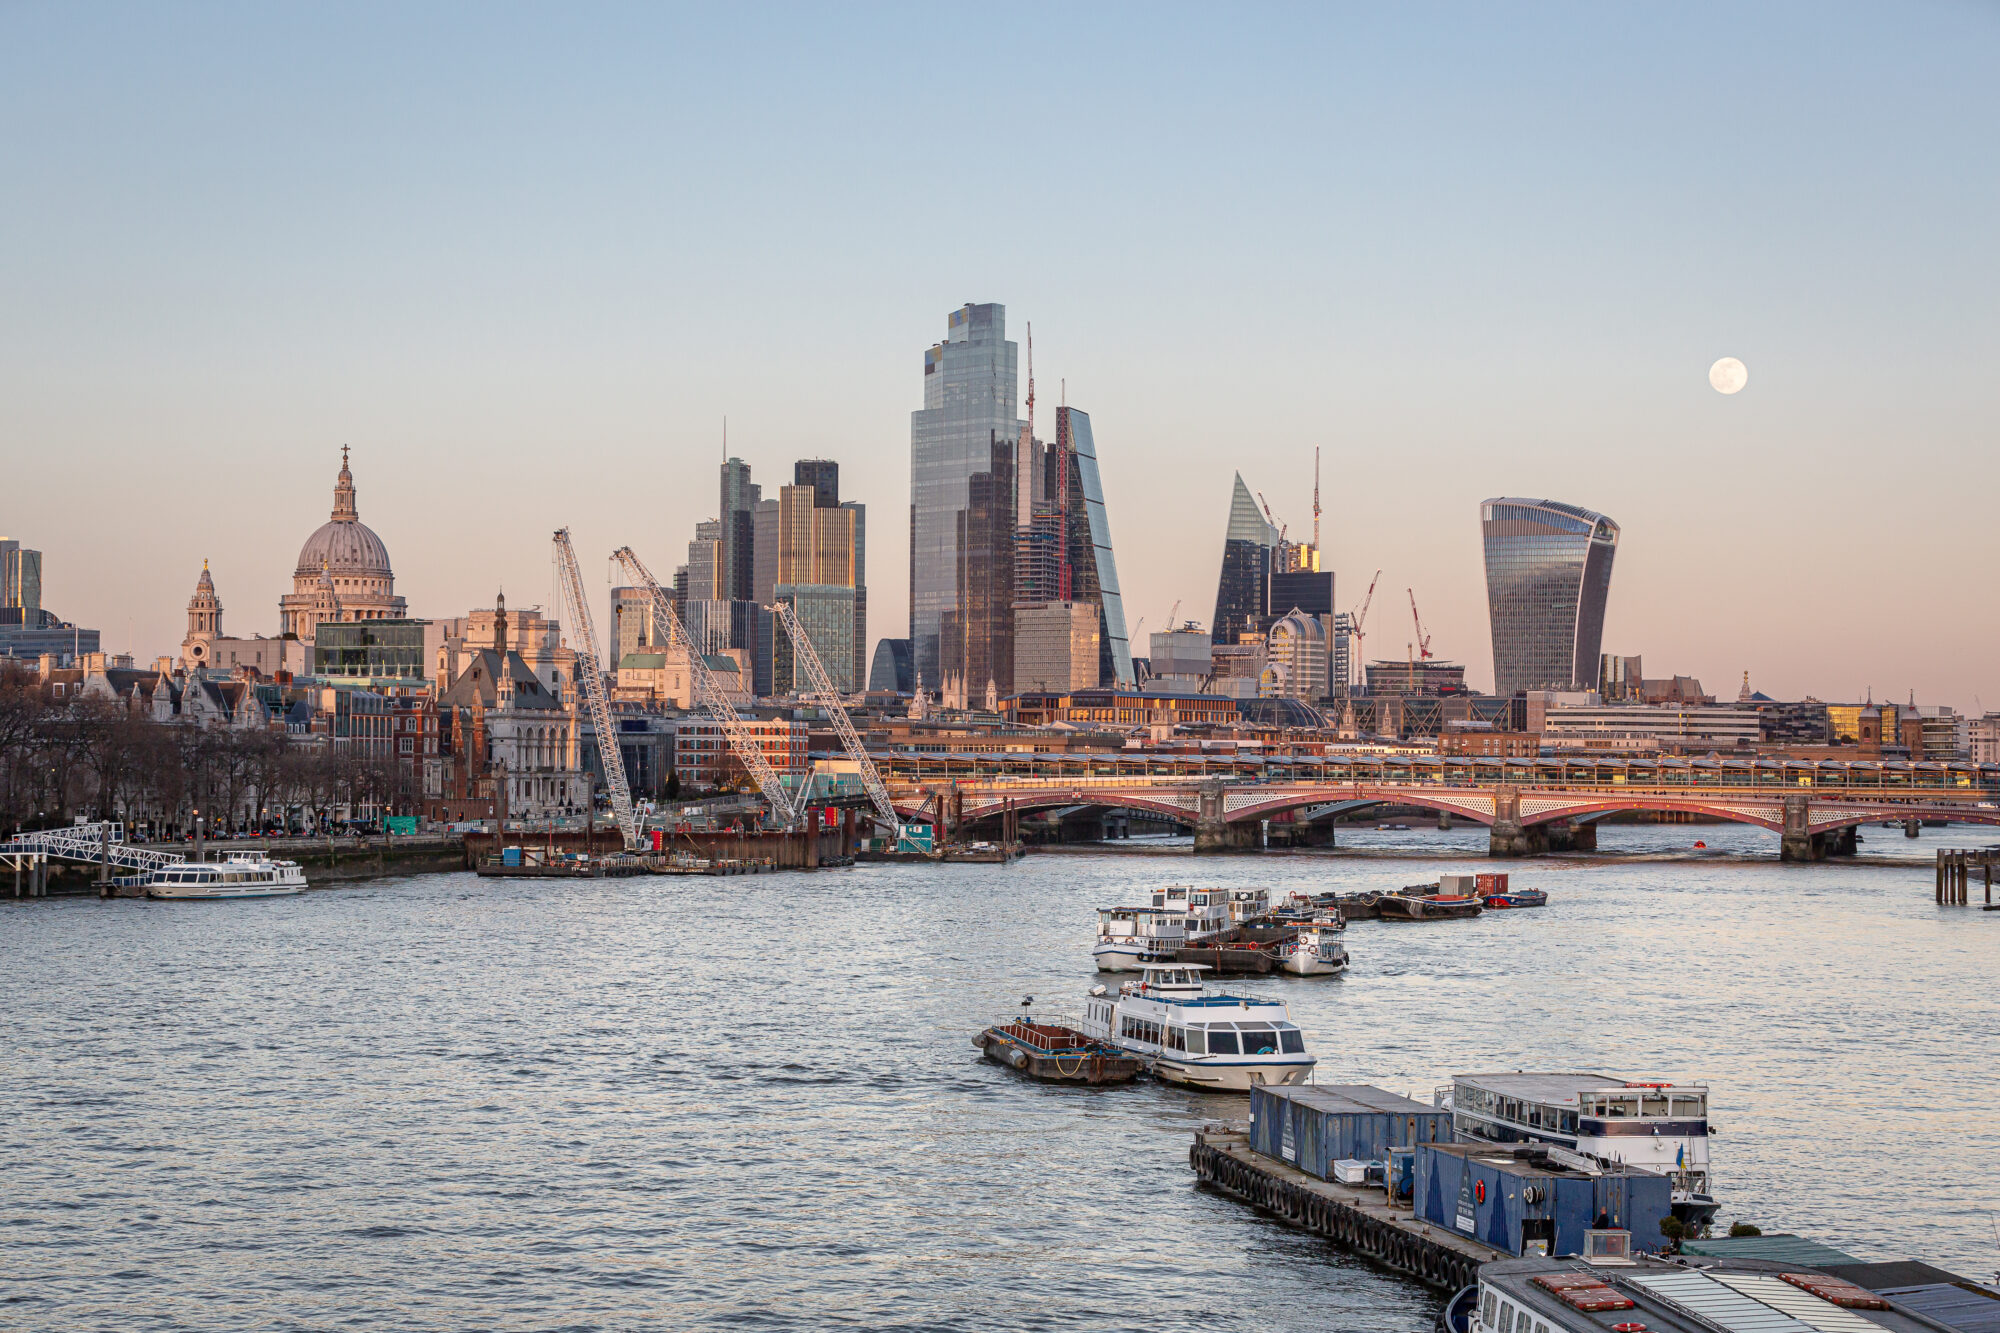 City of London skyline from the river Thames at sunset